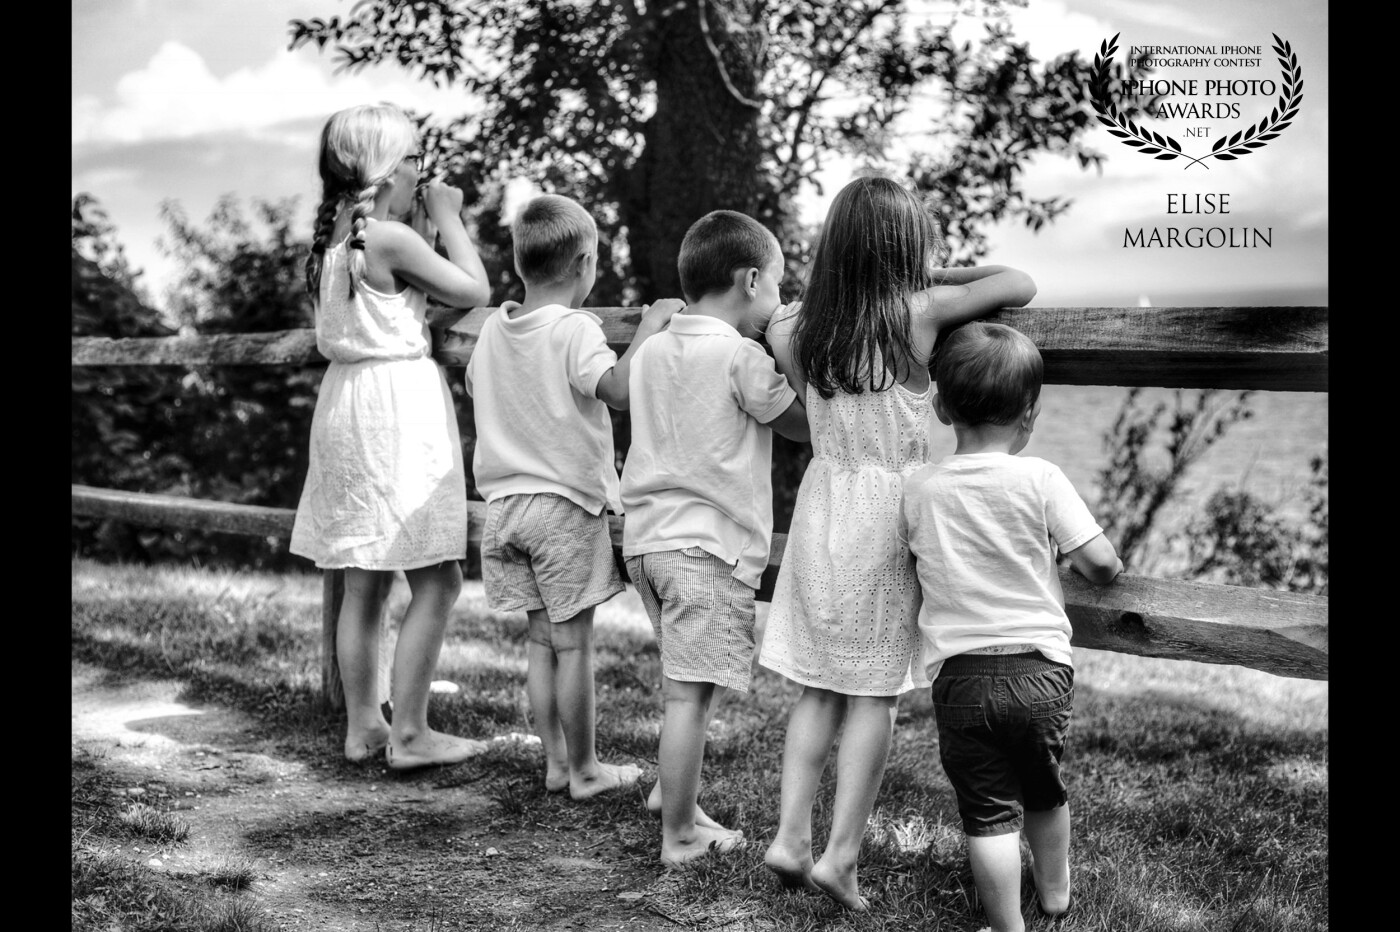 The beauty of childhood, the essence of summer. Watching children imagine and visualize the sights of summer. A moment in time, captured. 